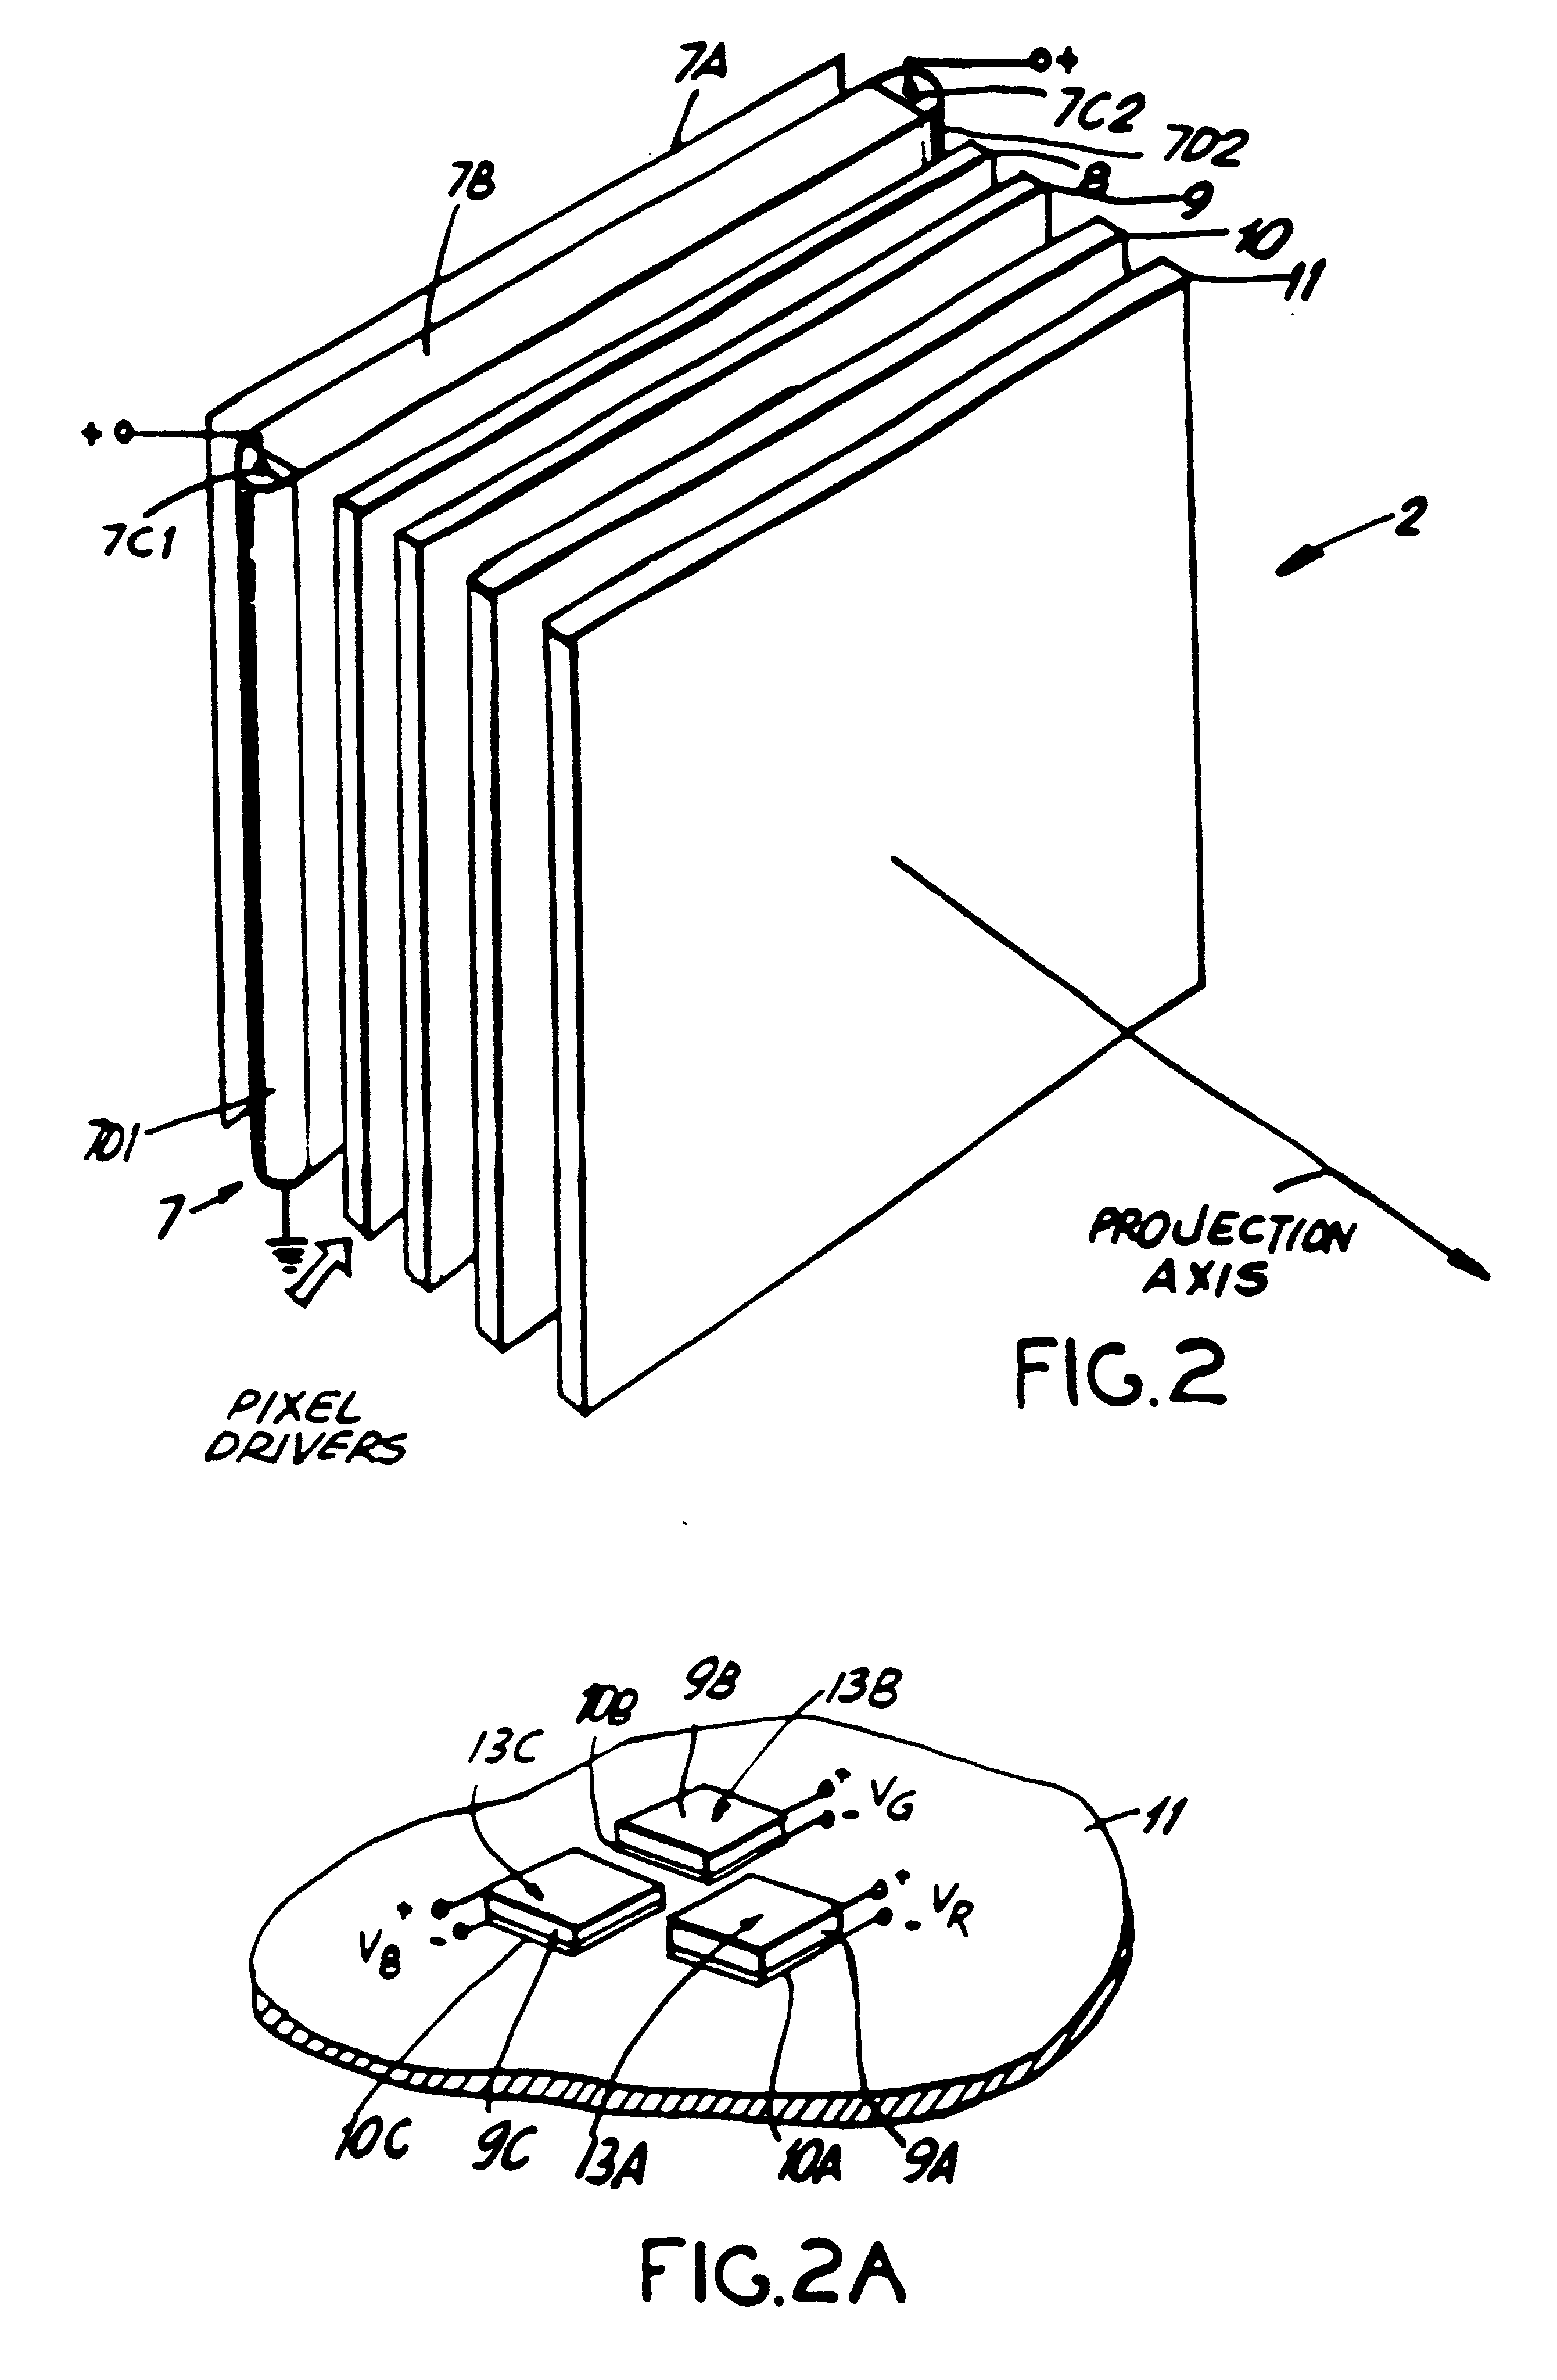 Image display panel having a backlighting structure and a single-layer pixelated aray of reflective-type spectral filtering elements where between light is recycled for producing color images with enhanced brightness